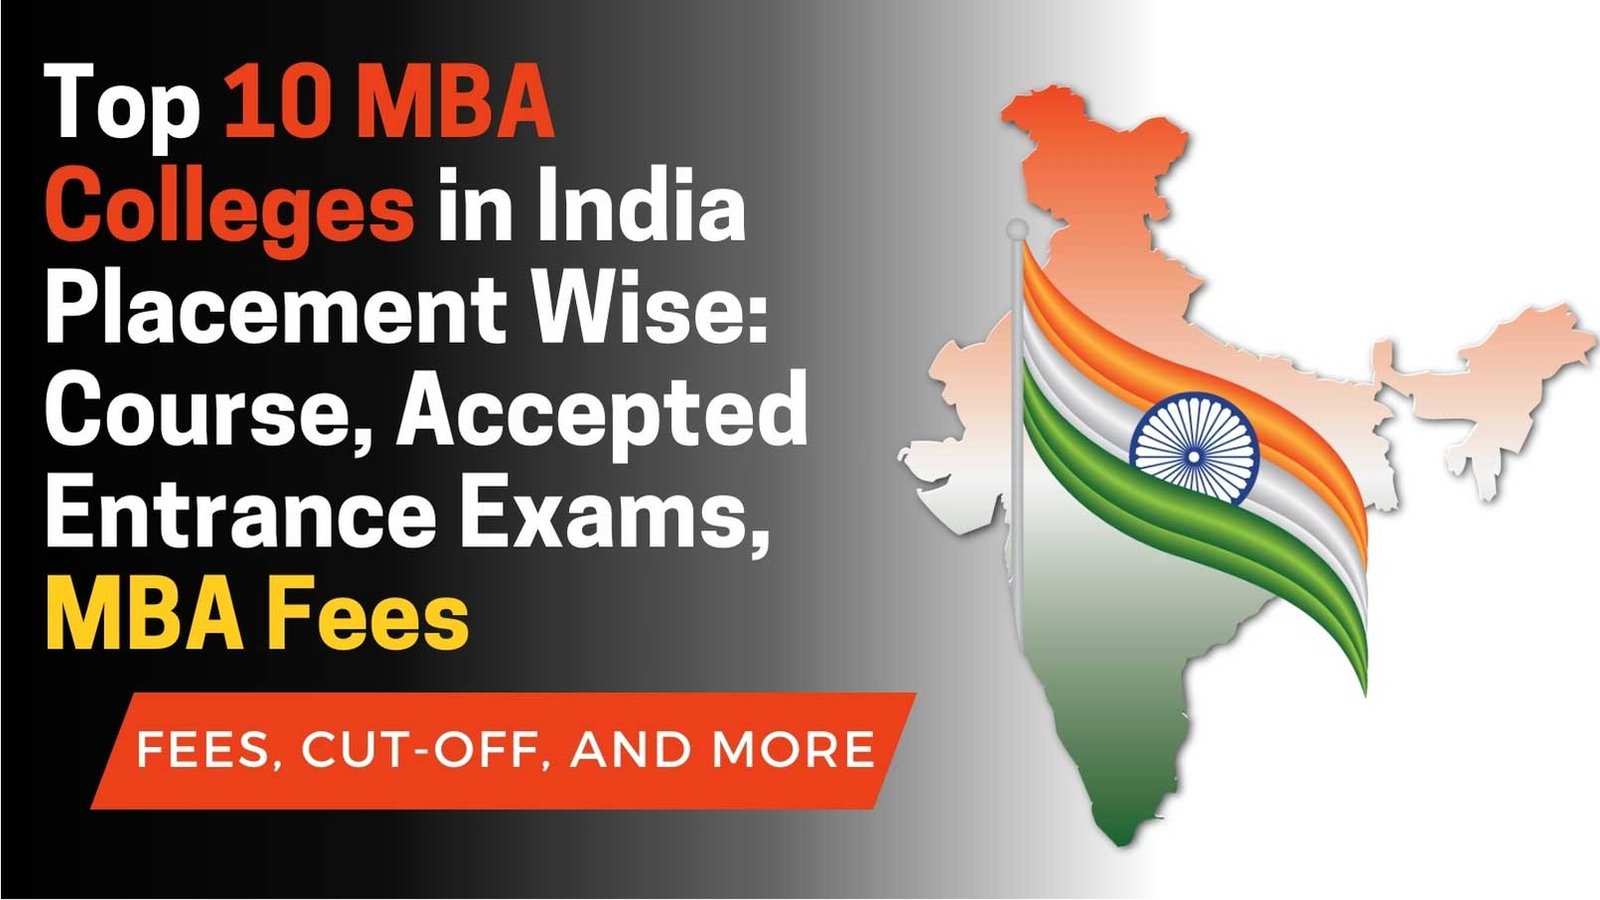 Top 10 MBA Colleges in India Placement Wise: Course, Accepted Entrance Exams, MBA Fees